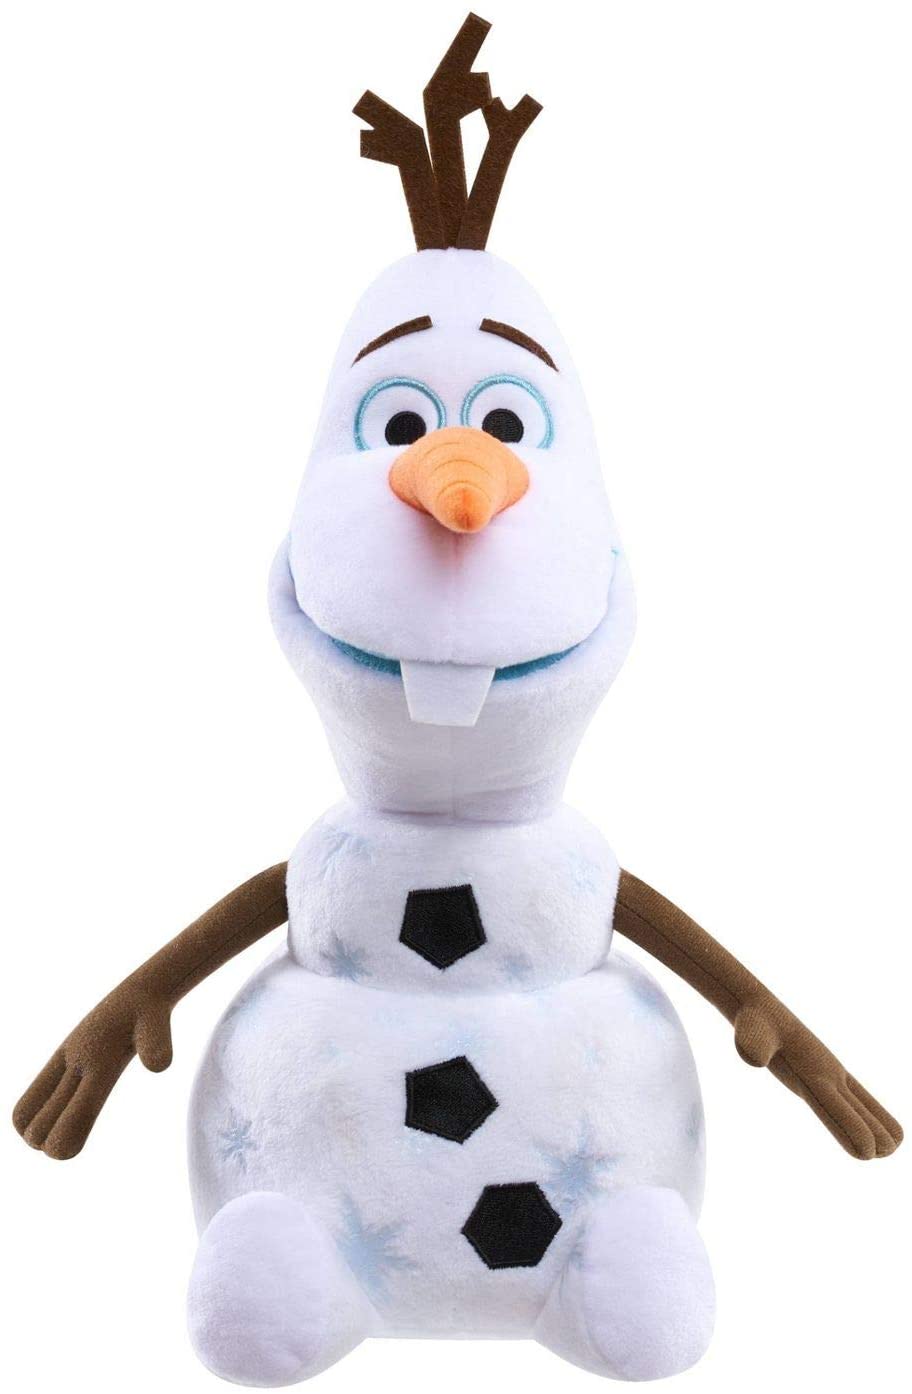 Disney Frozen 2 Sing and Swing light up Olaf Exclusive Plush Figure